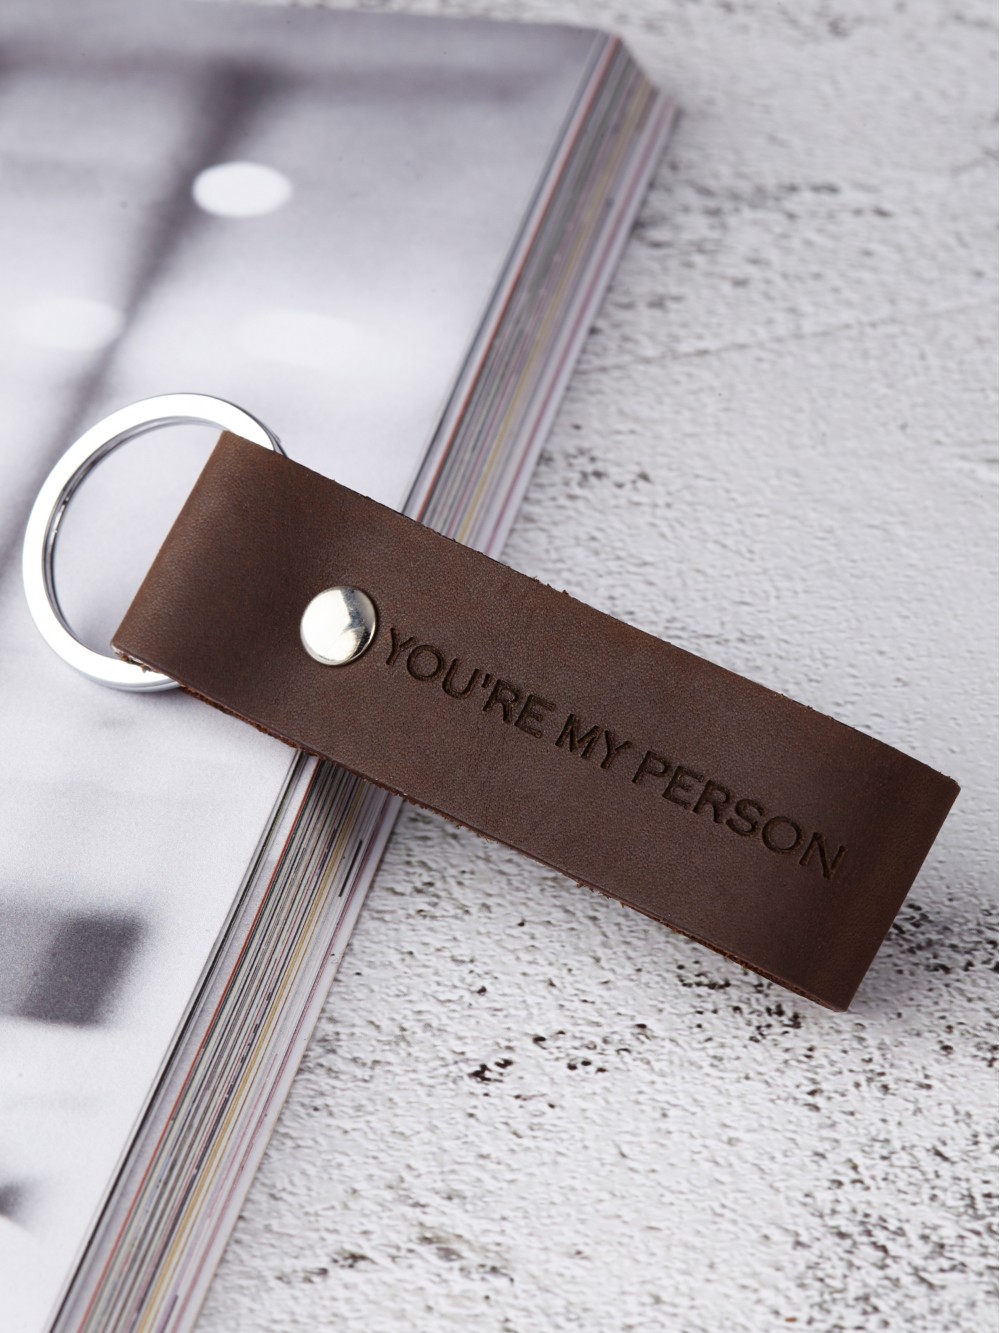 You're My Person Leather Keychain